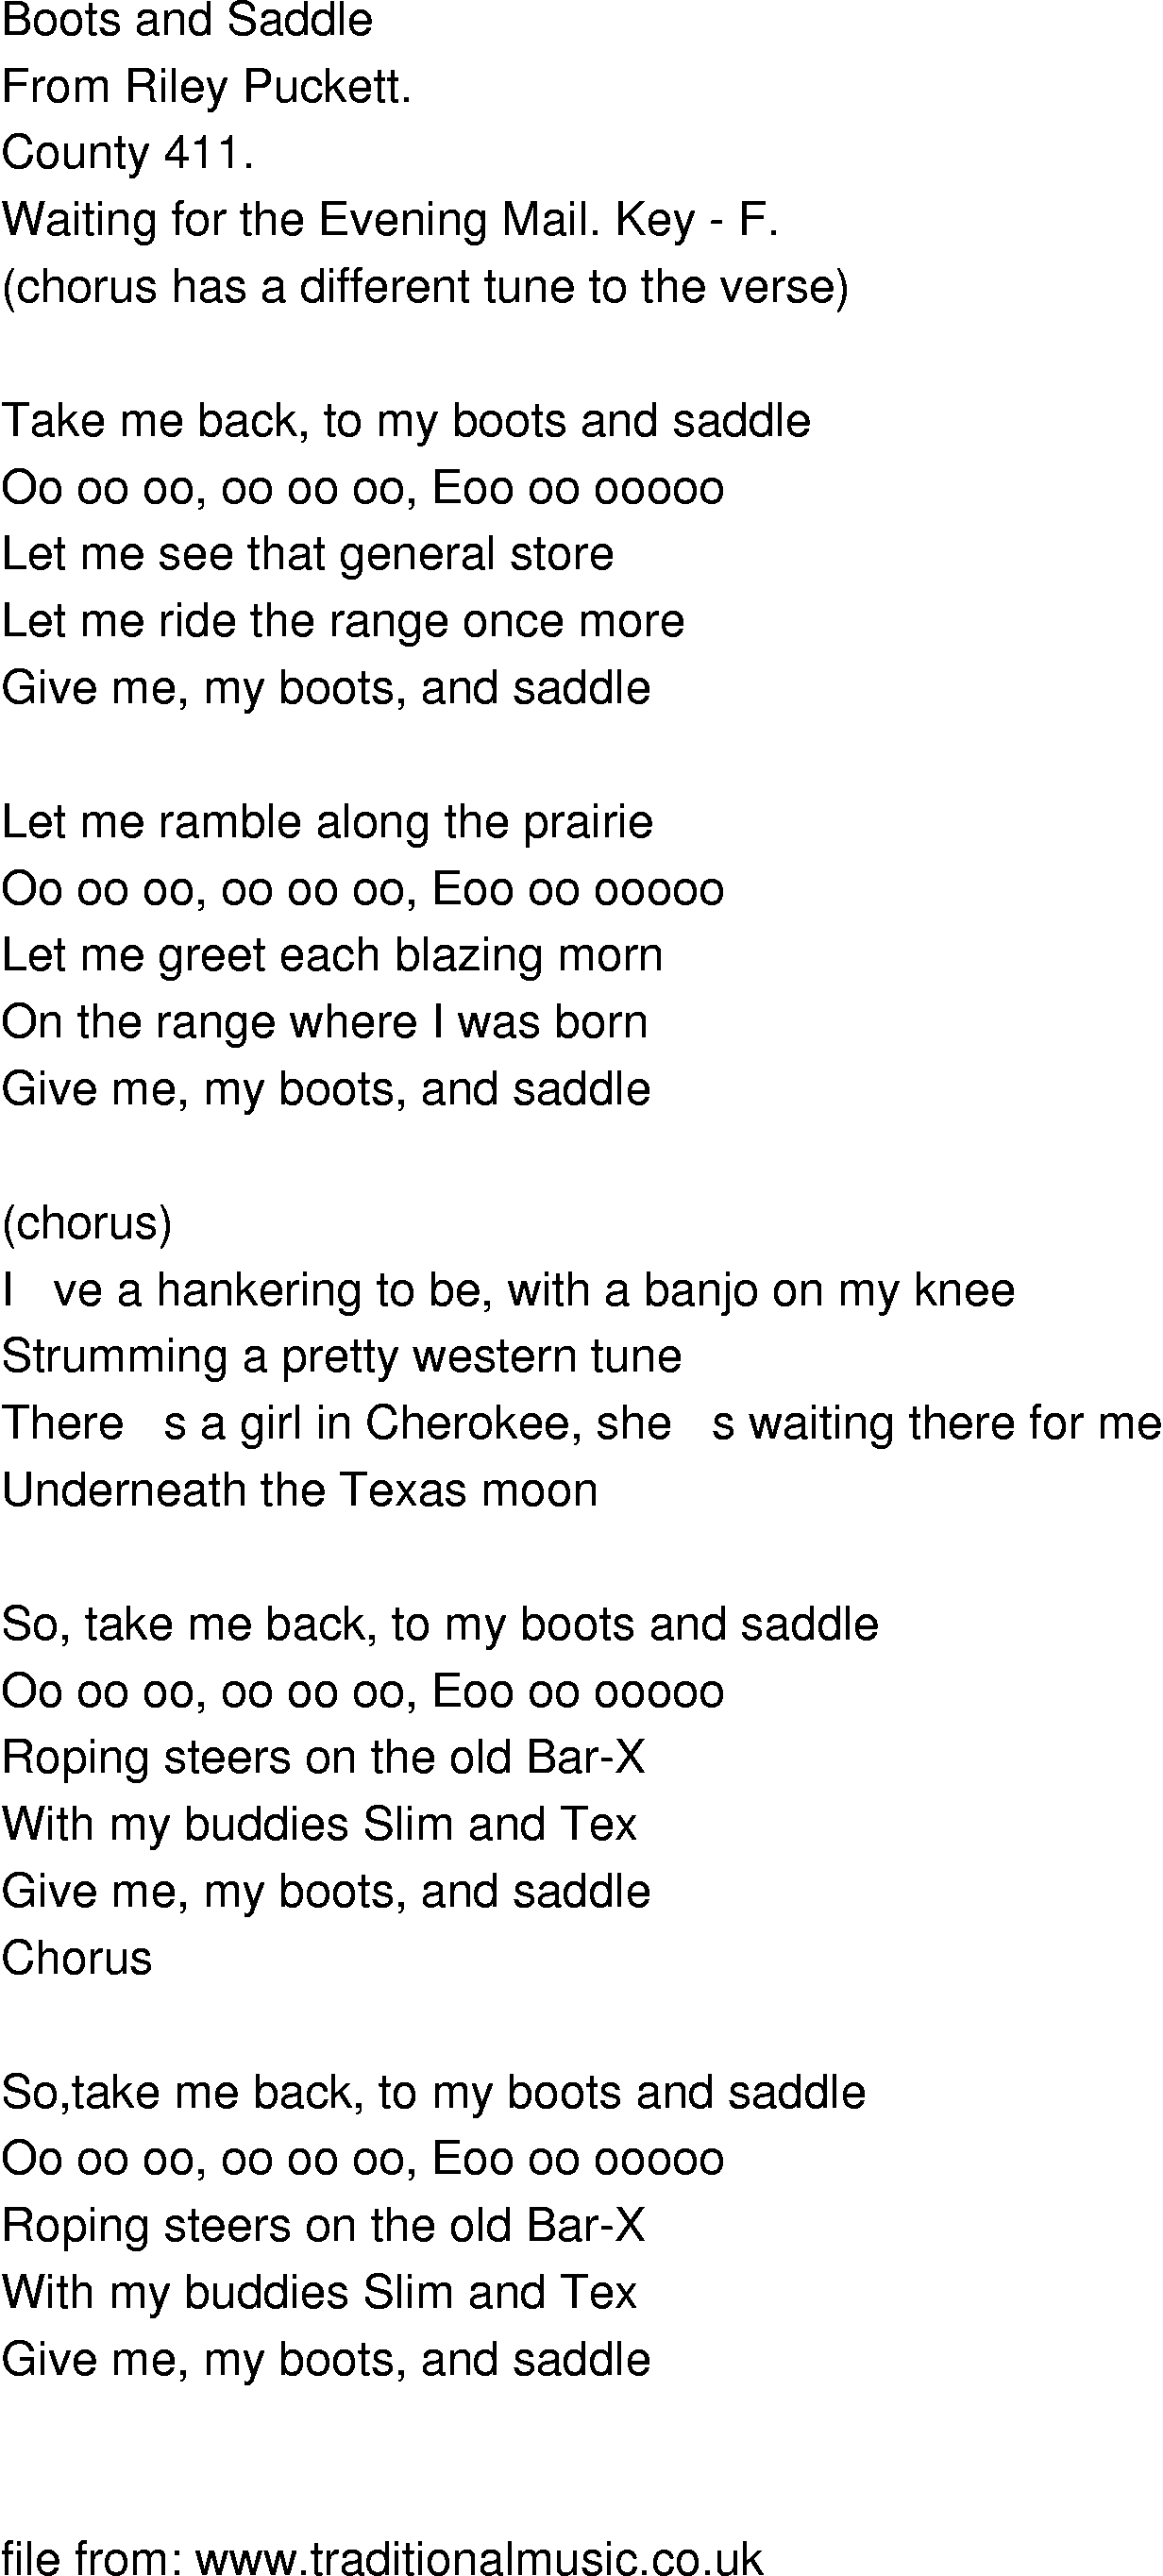 Old-Time (oldtimey) Song Lyrics - boots and saddle